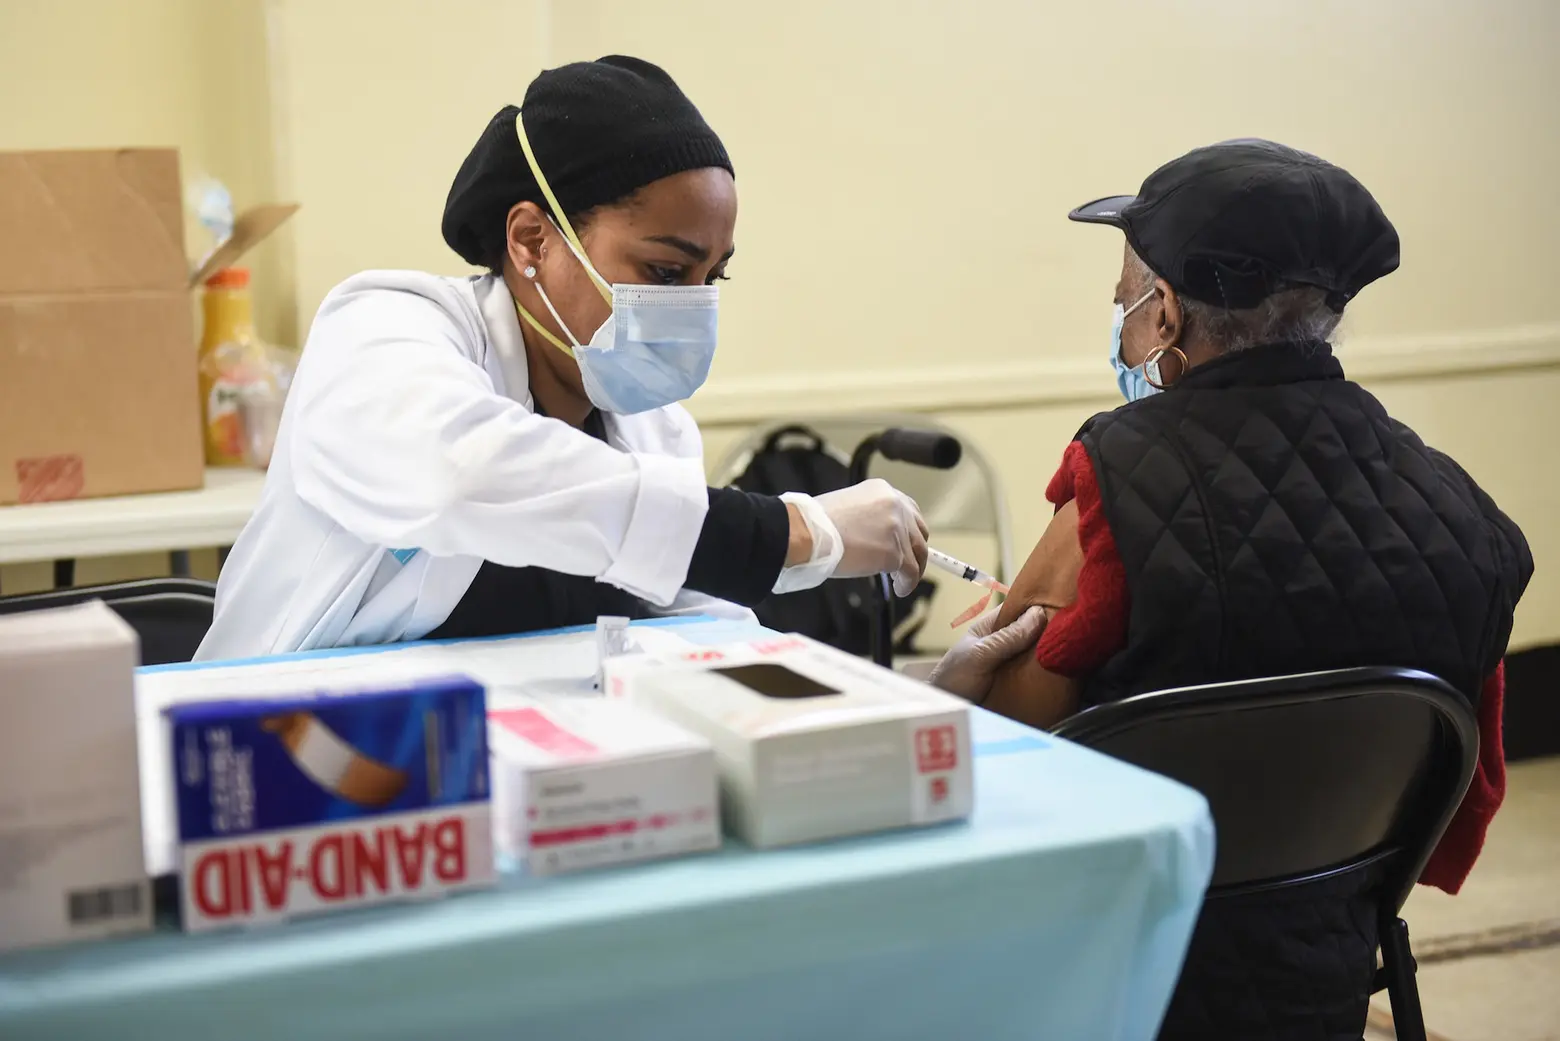 New York pharmacies can now vaccinate those with underlying conditions